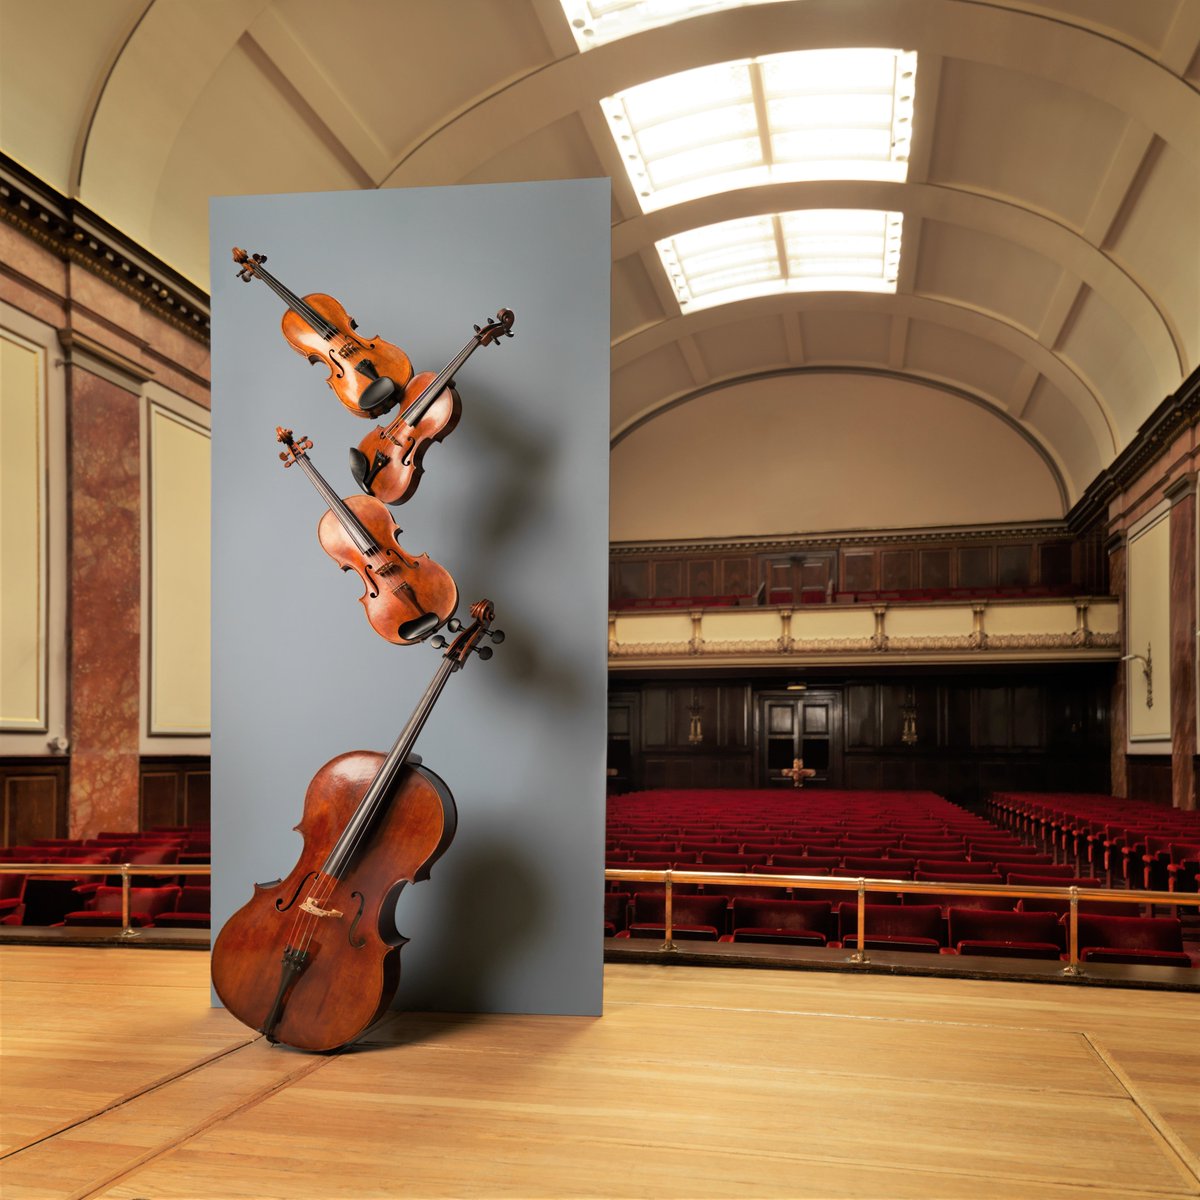 Are you ready to fill this stage? 🎻 Applications are open for the 2025 Wigmore Hall International String Quartet Competition 🎉 Find out more and apply here: wigmore-hall.org.uk/competitions/w…